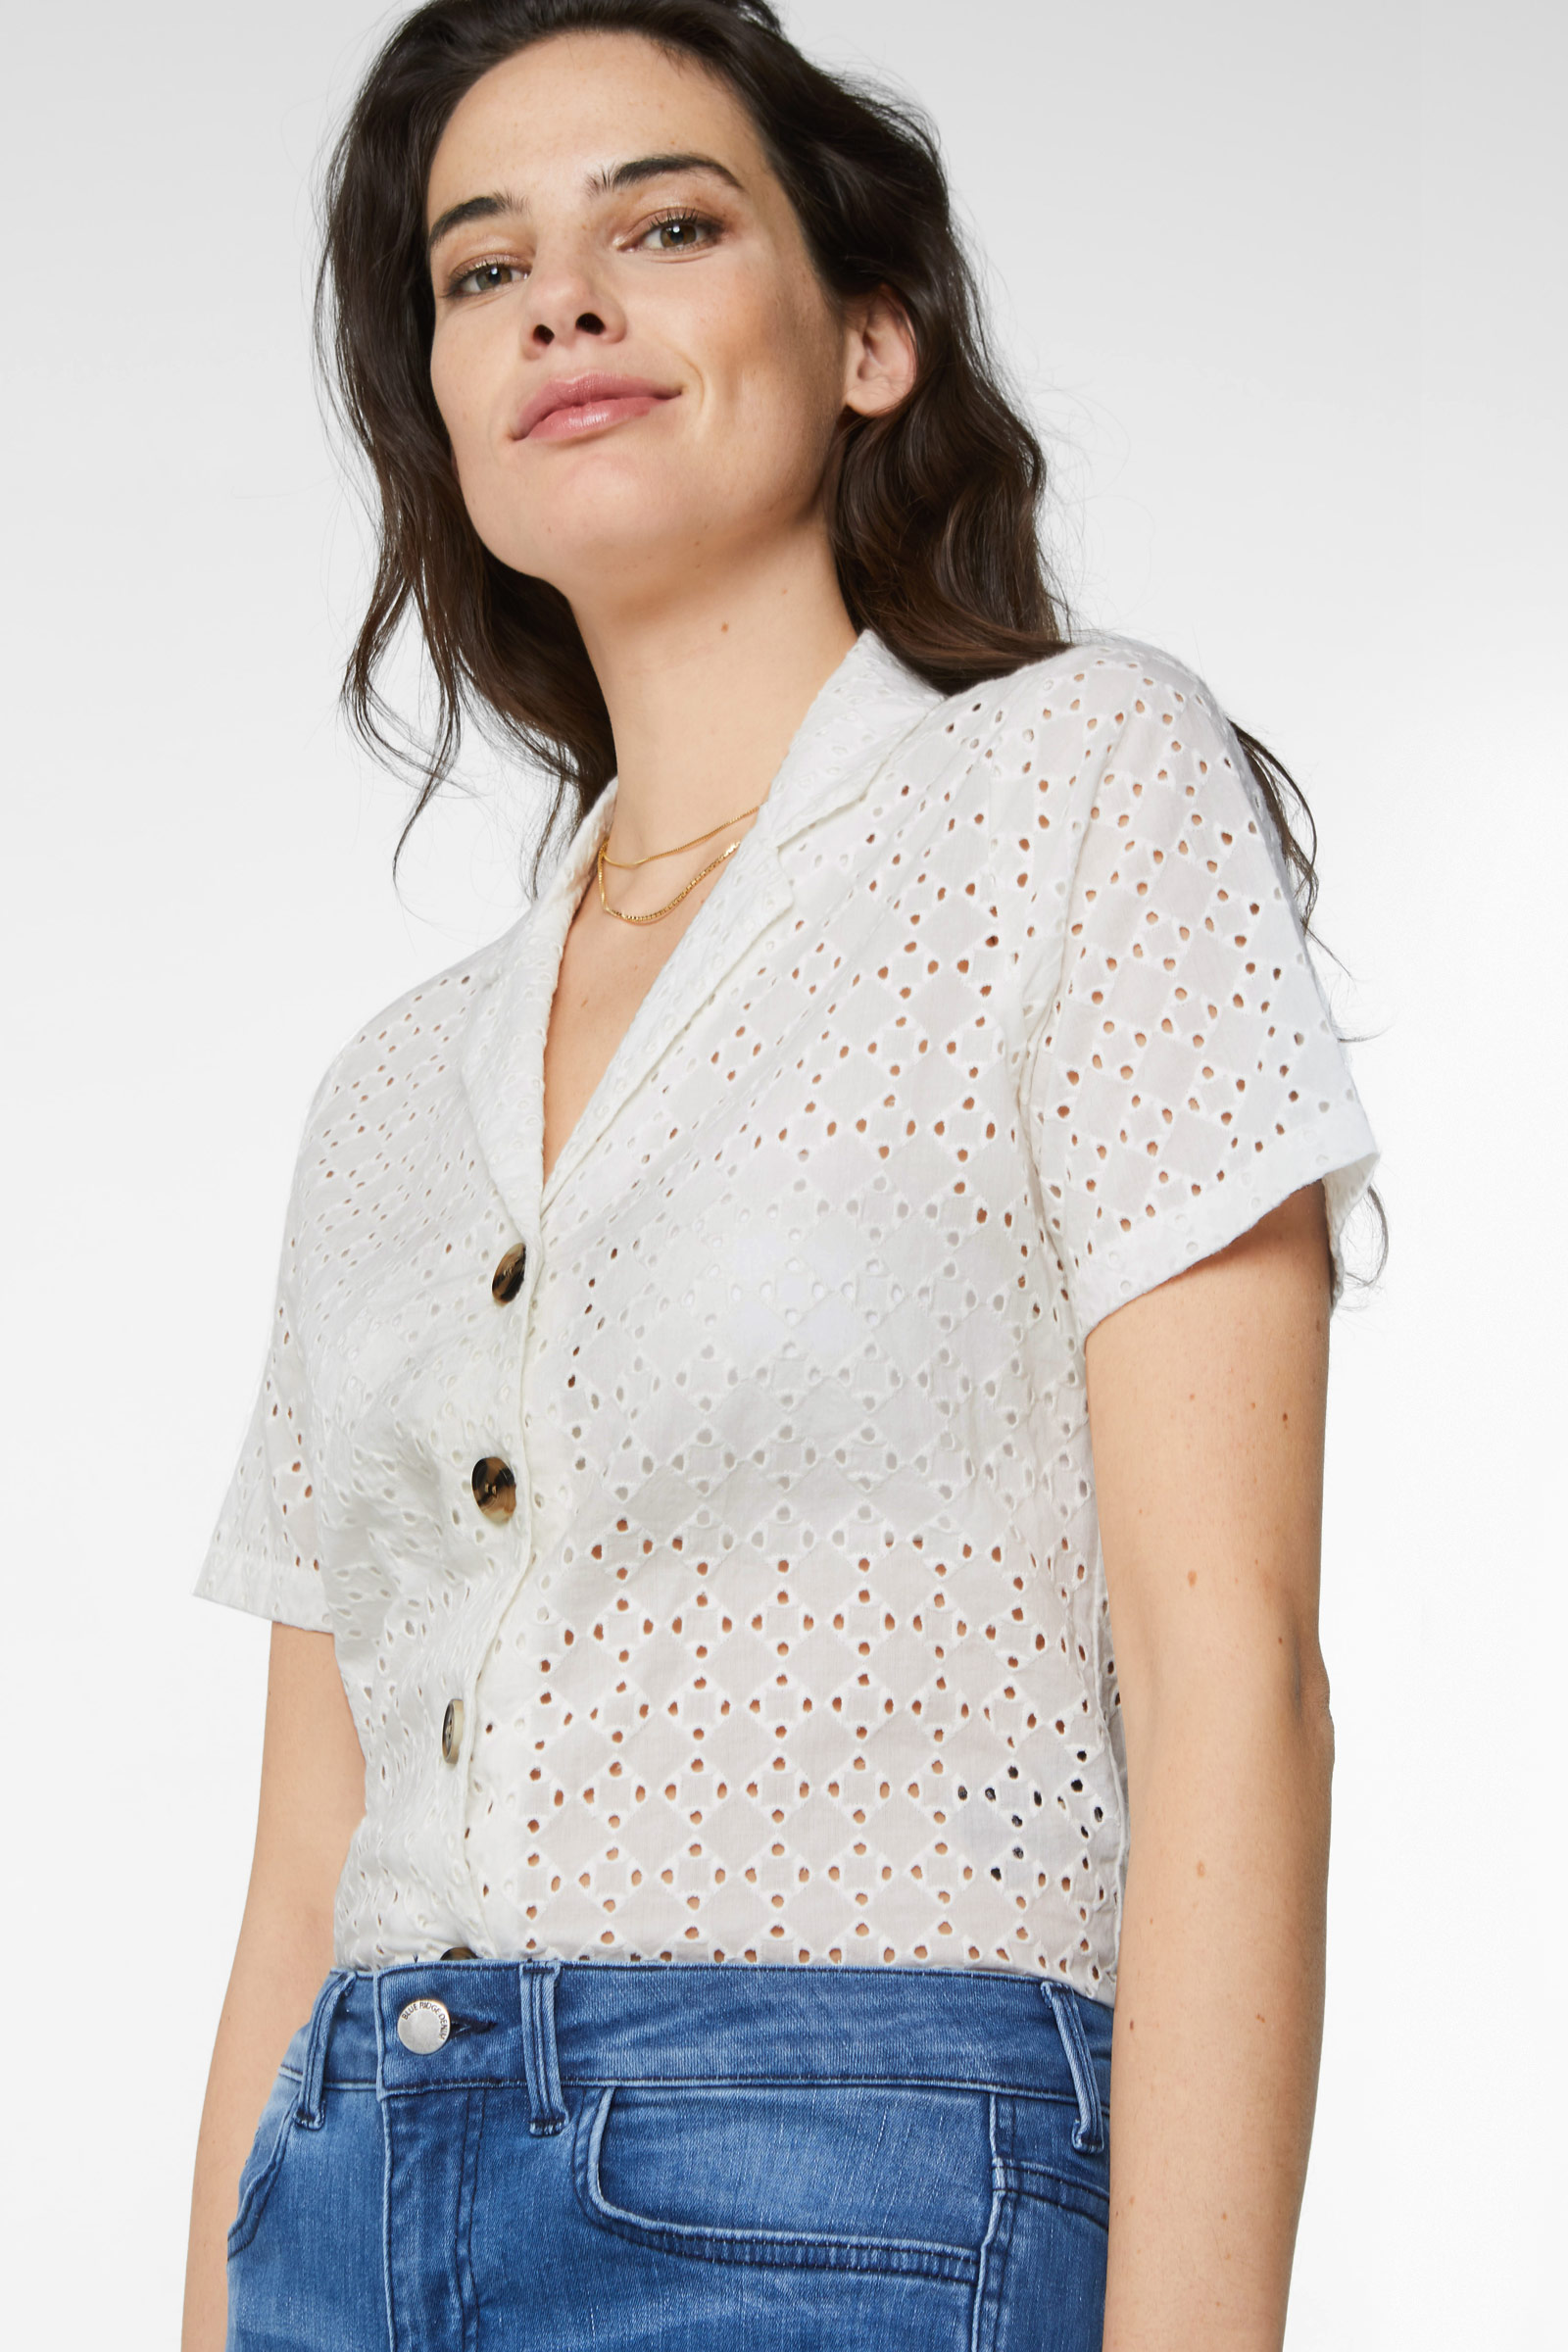 Broderie anglaise T-shirt Farfetch Dames Kleding Blouses & Tunieken Blouses Broderie Blouses 